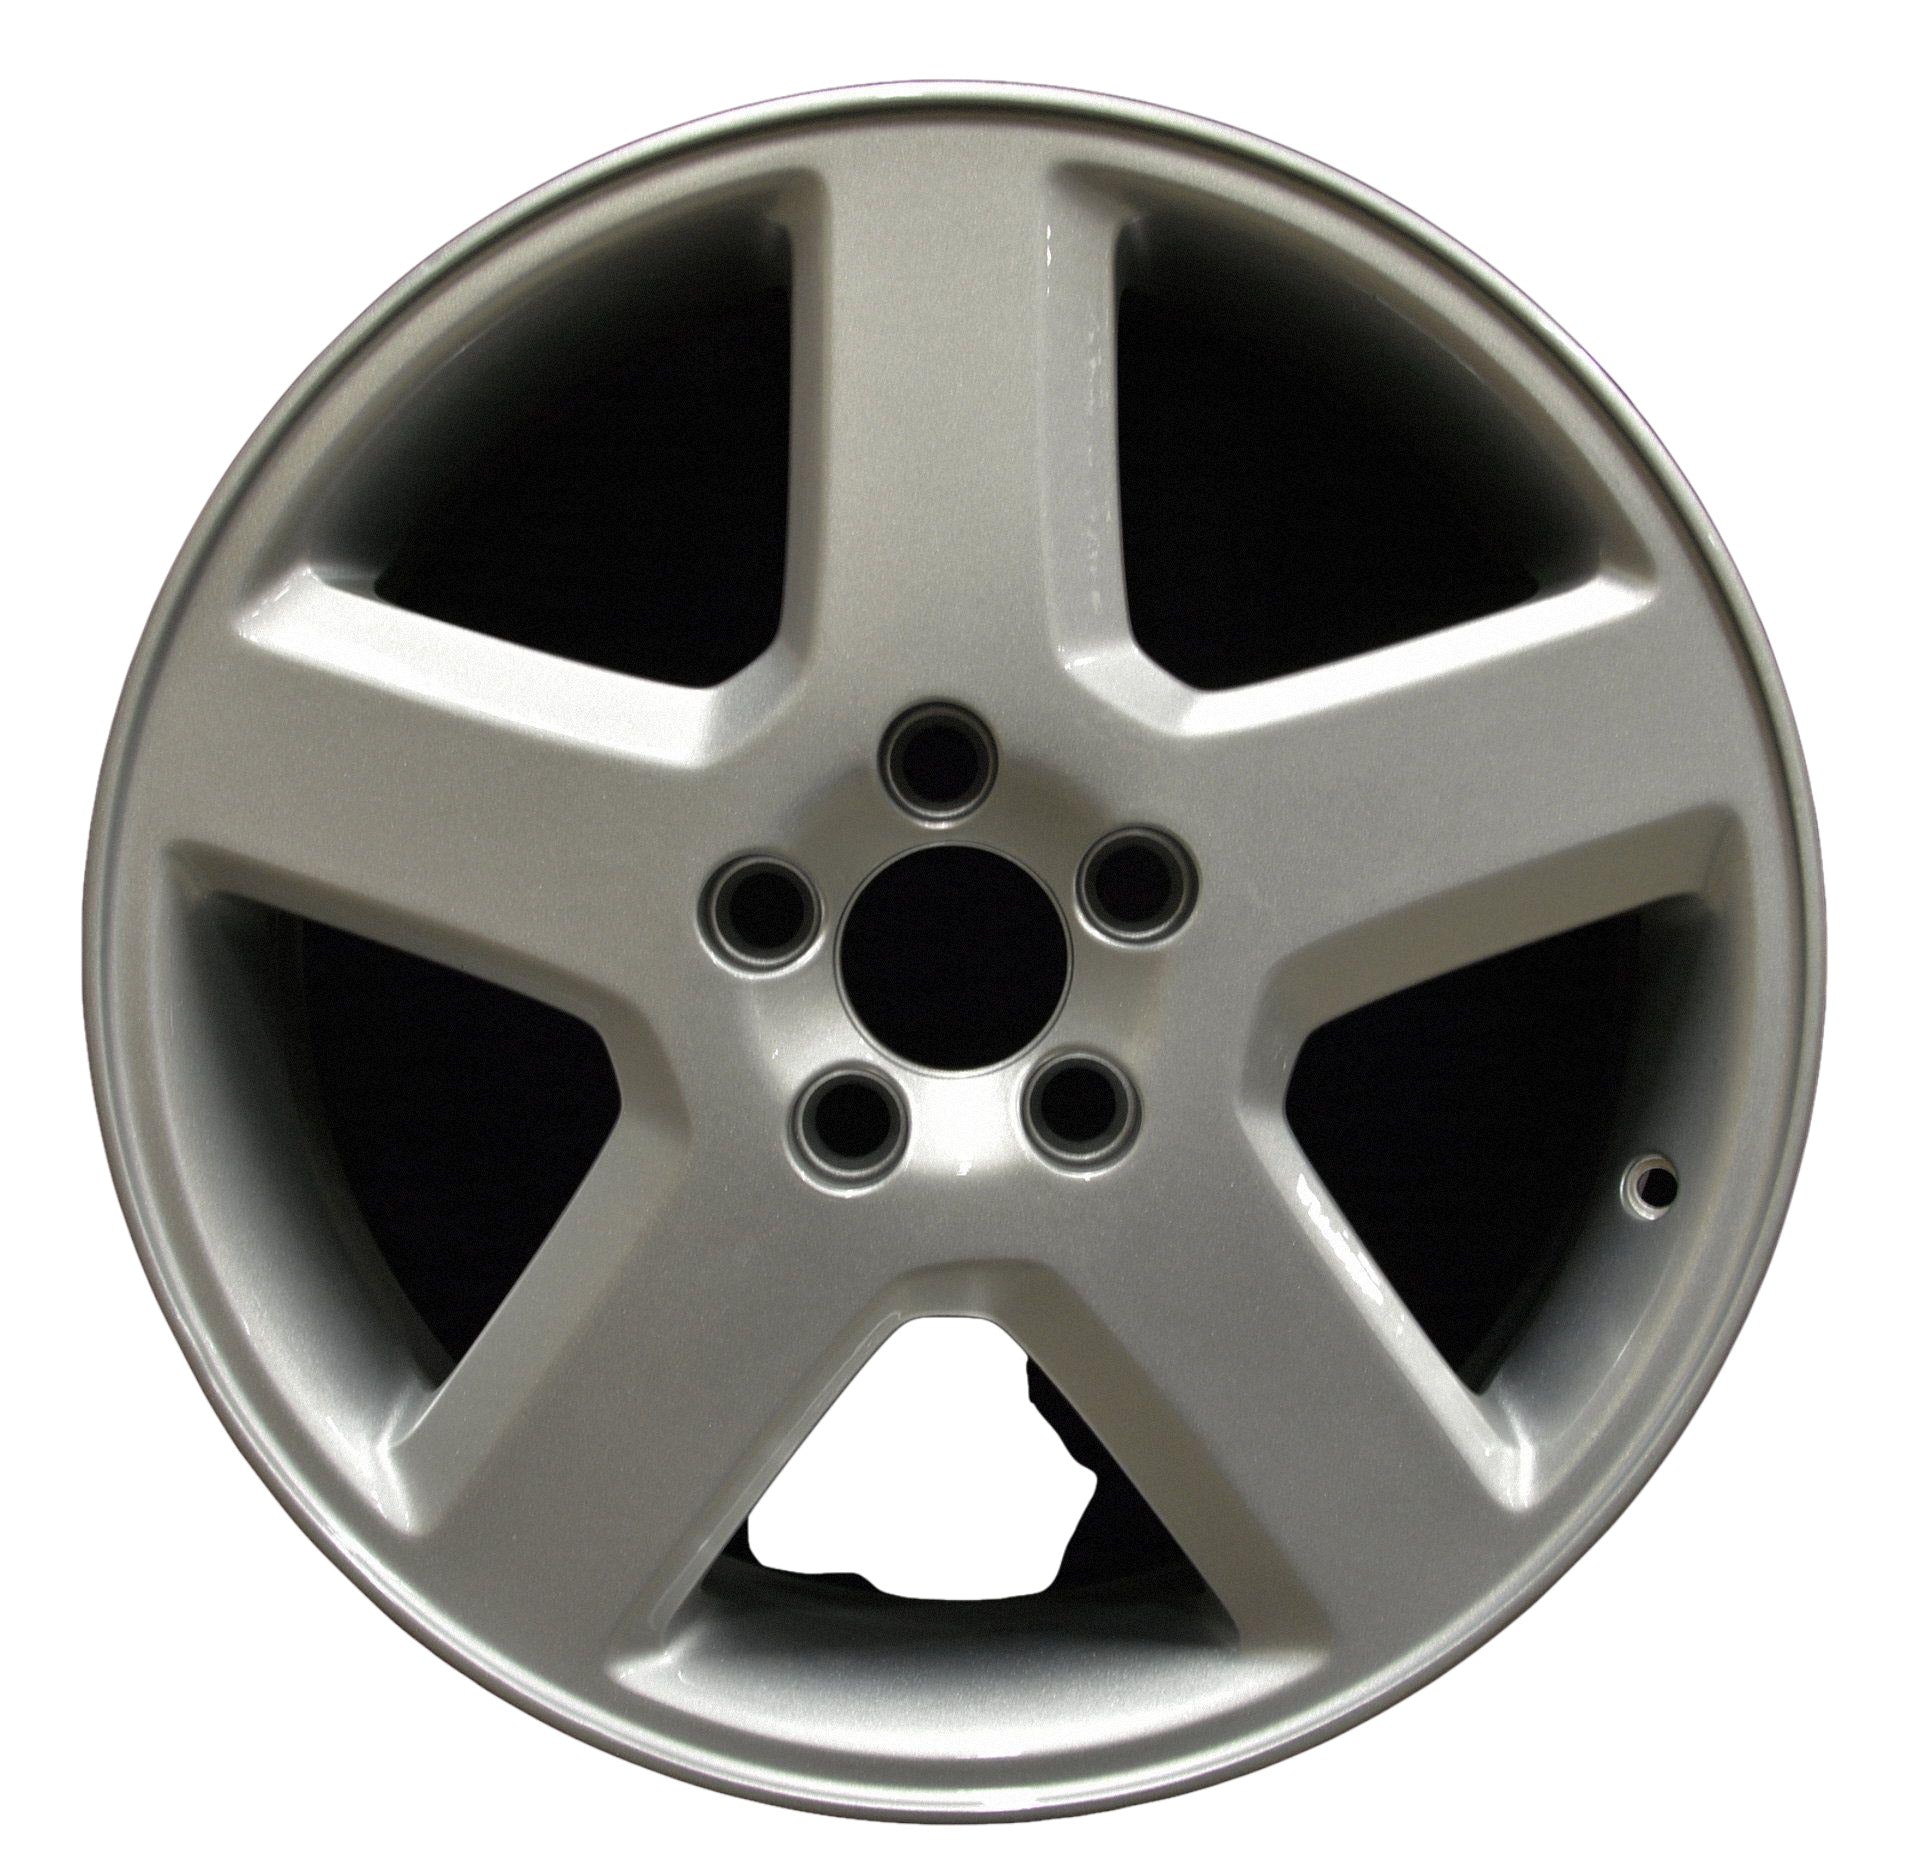 Volvo 50 Series  2005, 2006, 2007, 2008, 2009, 2010 Factory OEM Car Wheel Size 17x7 Alloy WAO.70285.PS14.FF